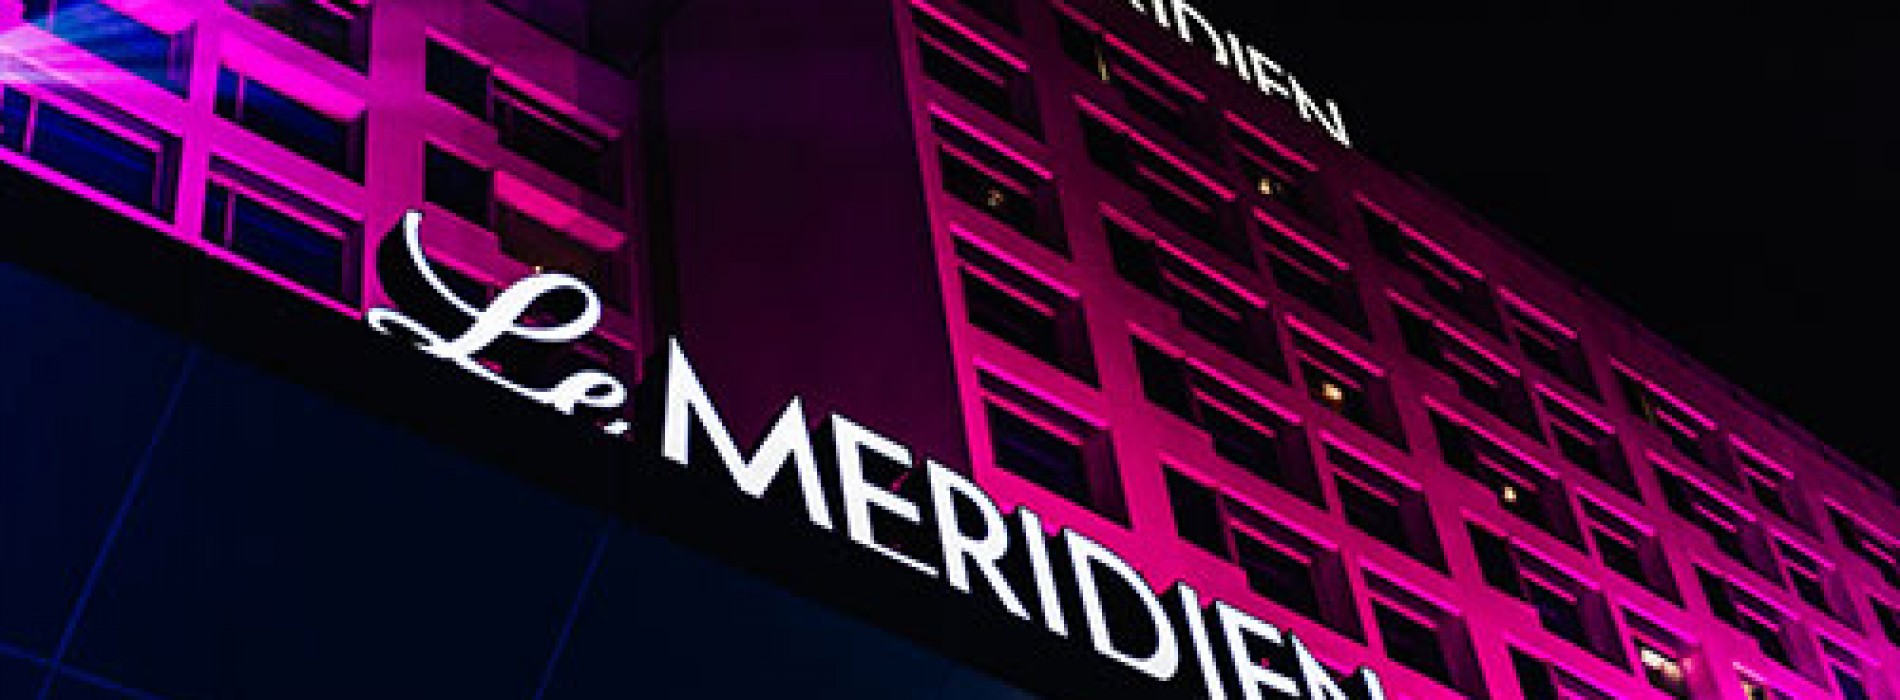 Le Meridien brings inspired discovery to the bustling Millenium City of Gurgaon